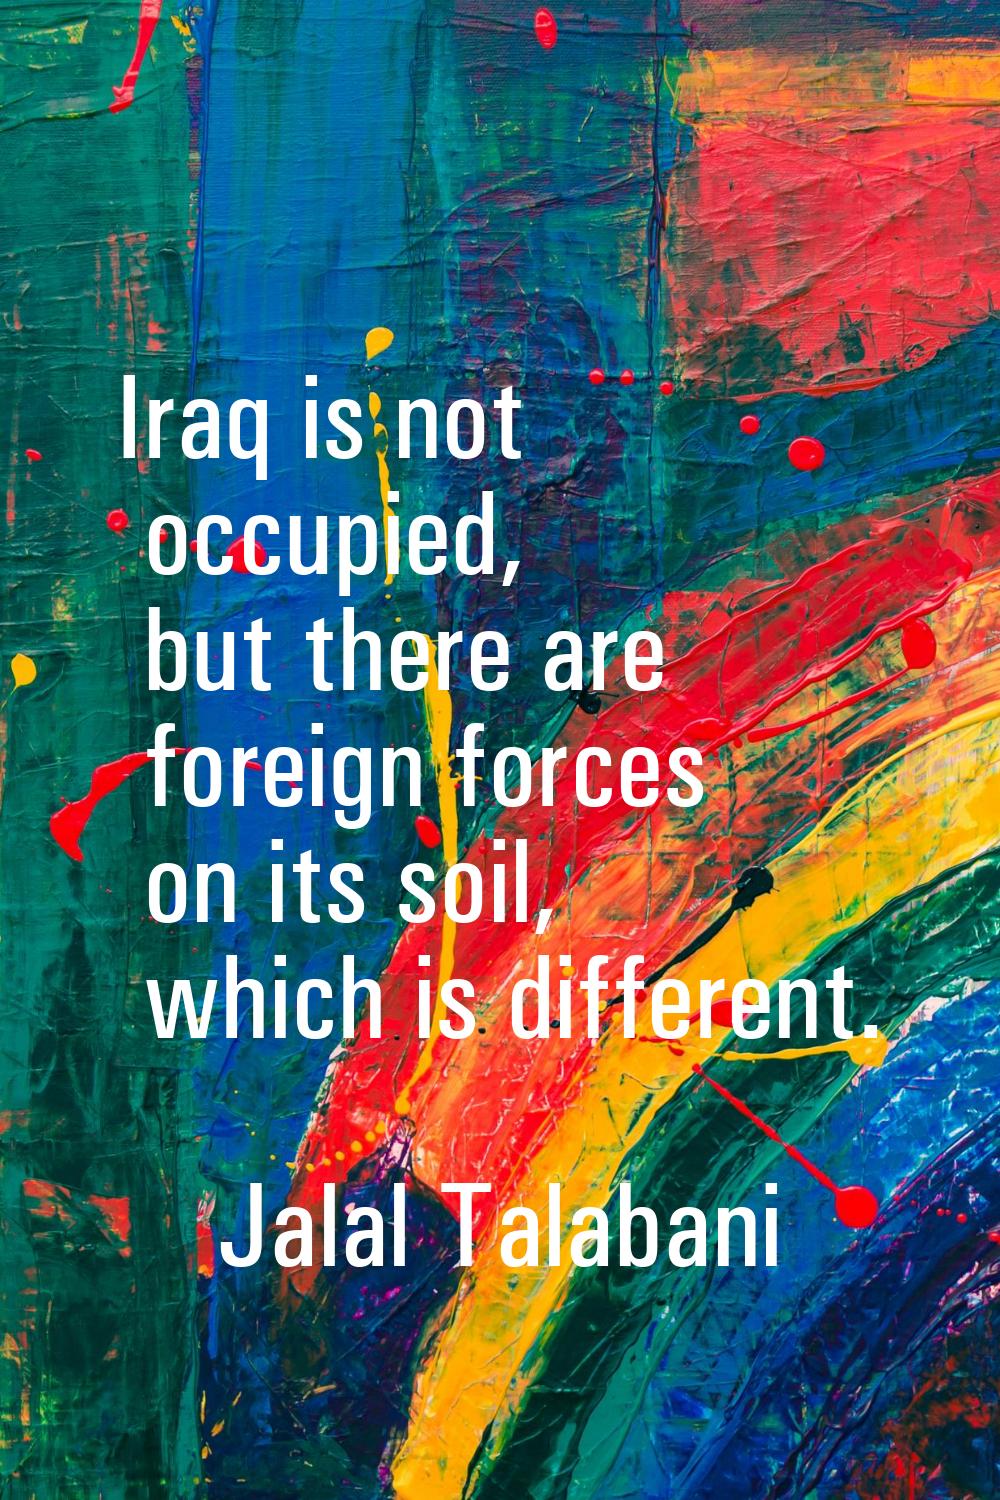 Iraq is not occupied, but there are foreign forces on its soil, which is different.